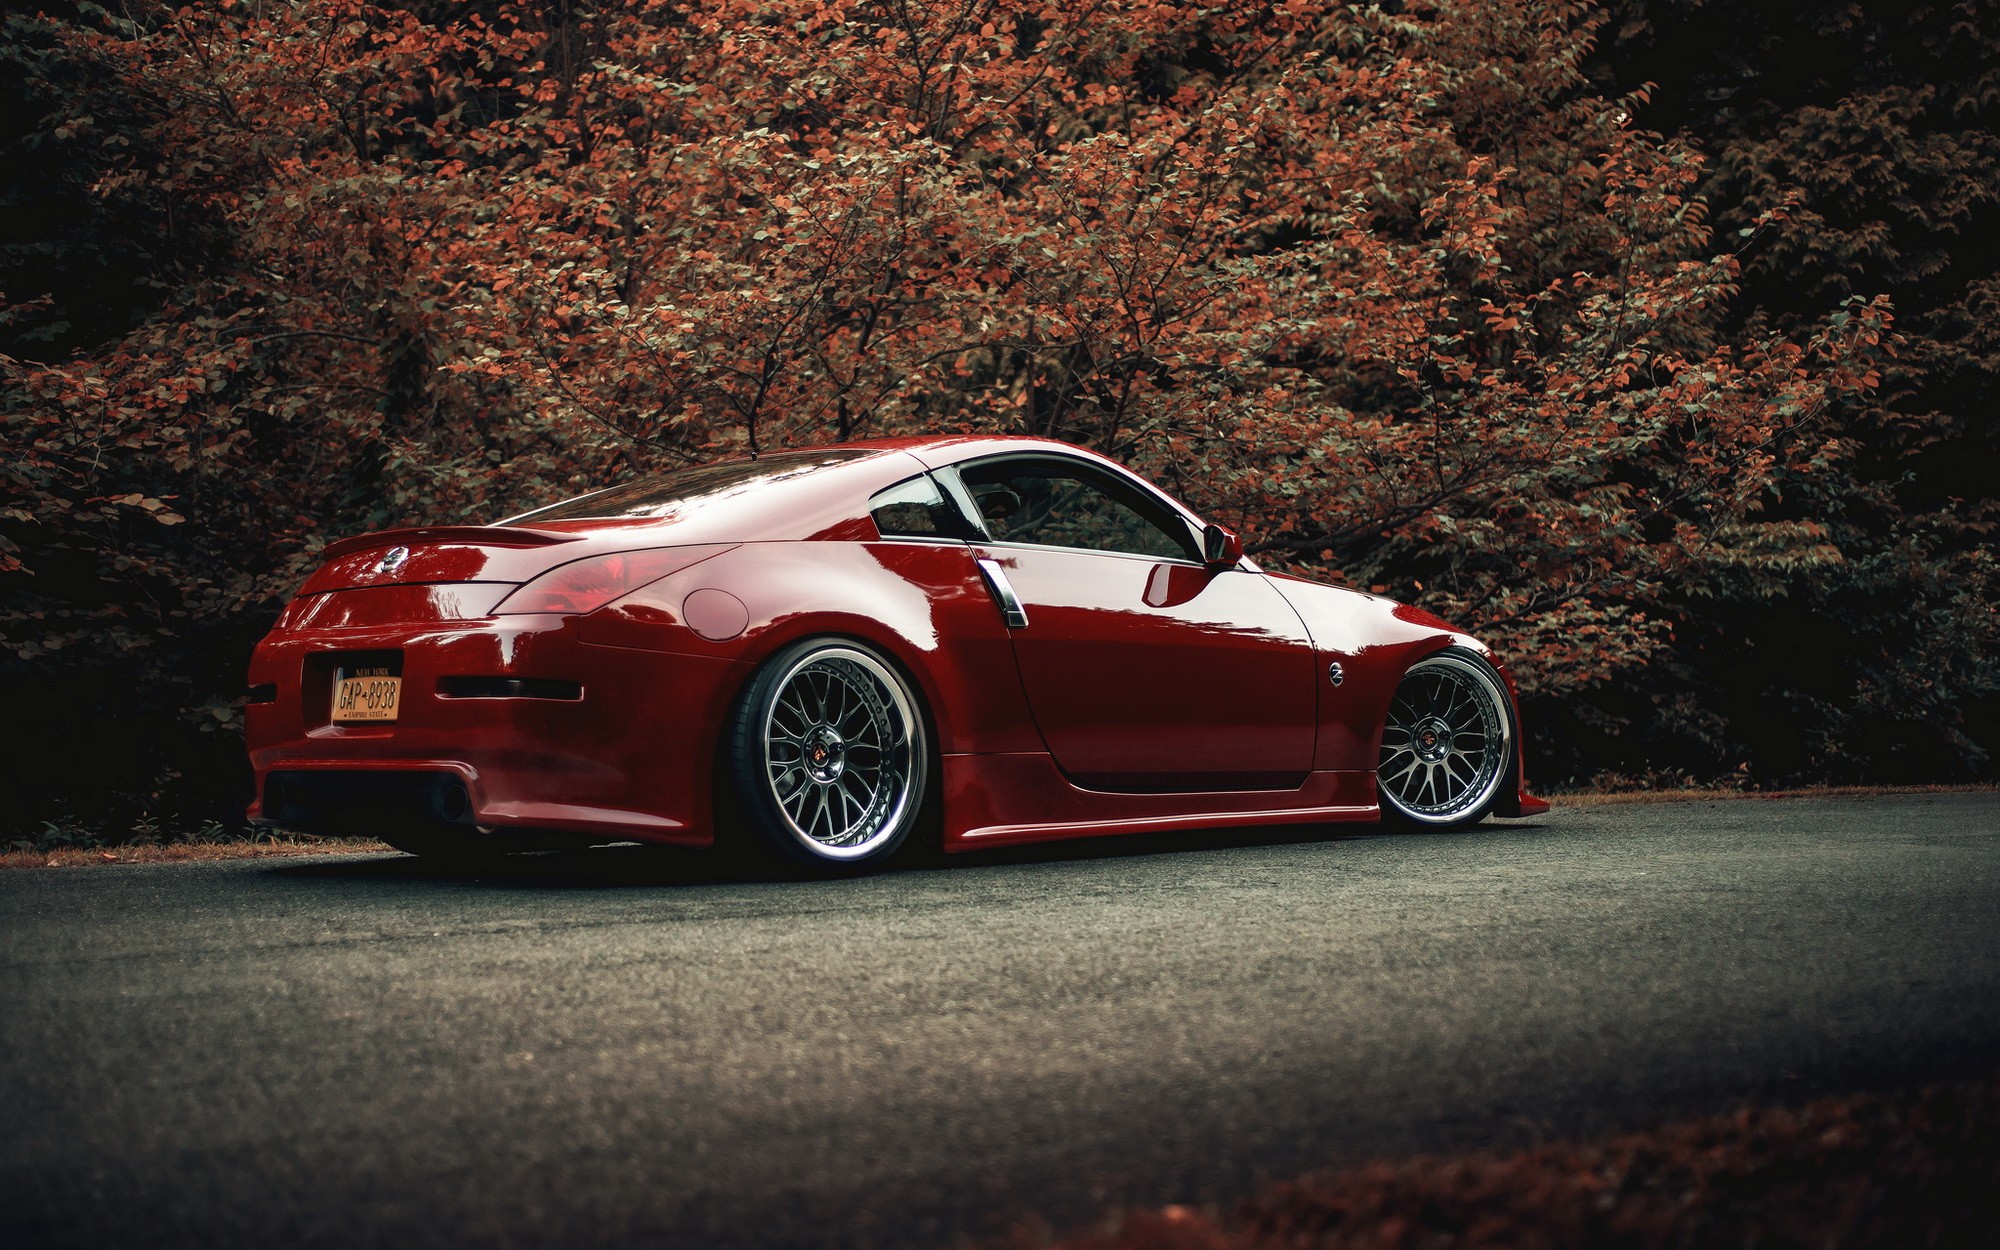 Download wallpaper 800x1200 nissan 350z stance movement speed side  view iphone 4s4 for parallax hd background